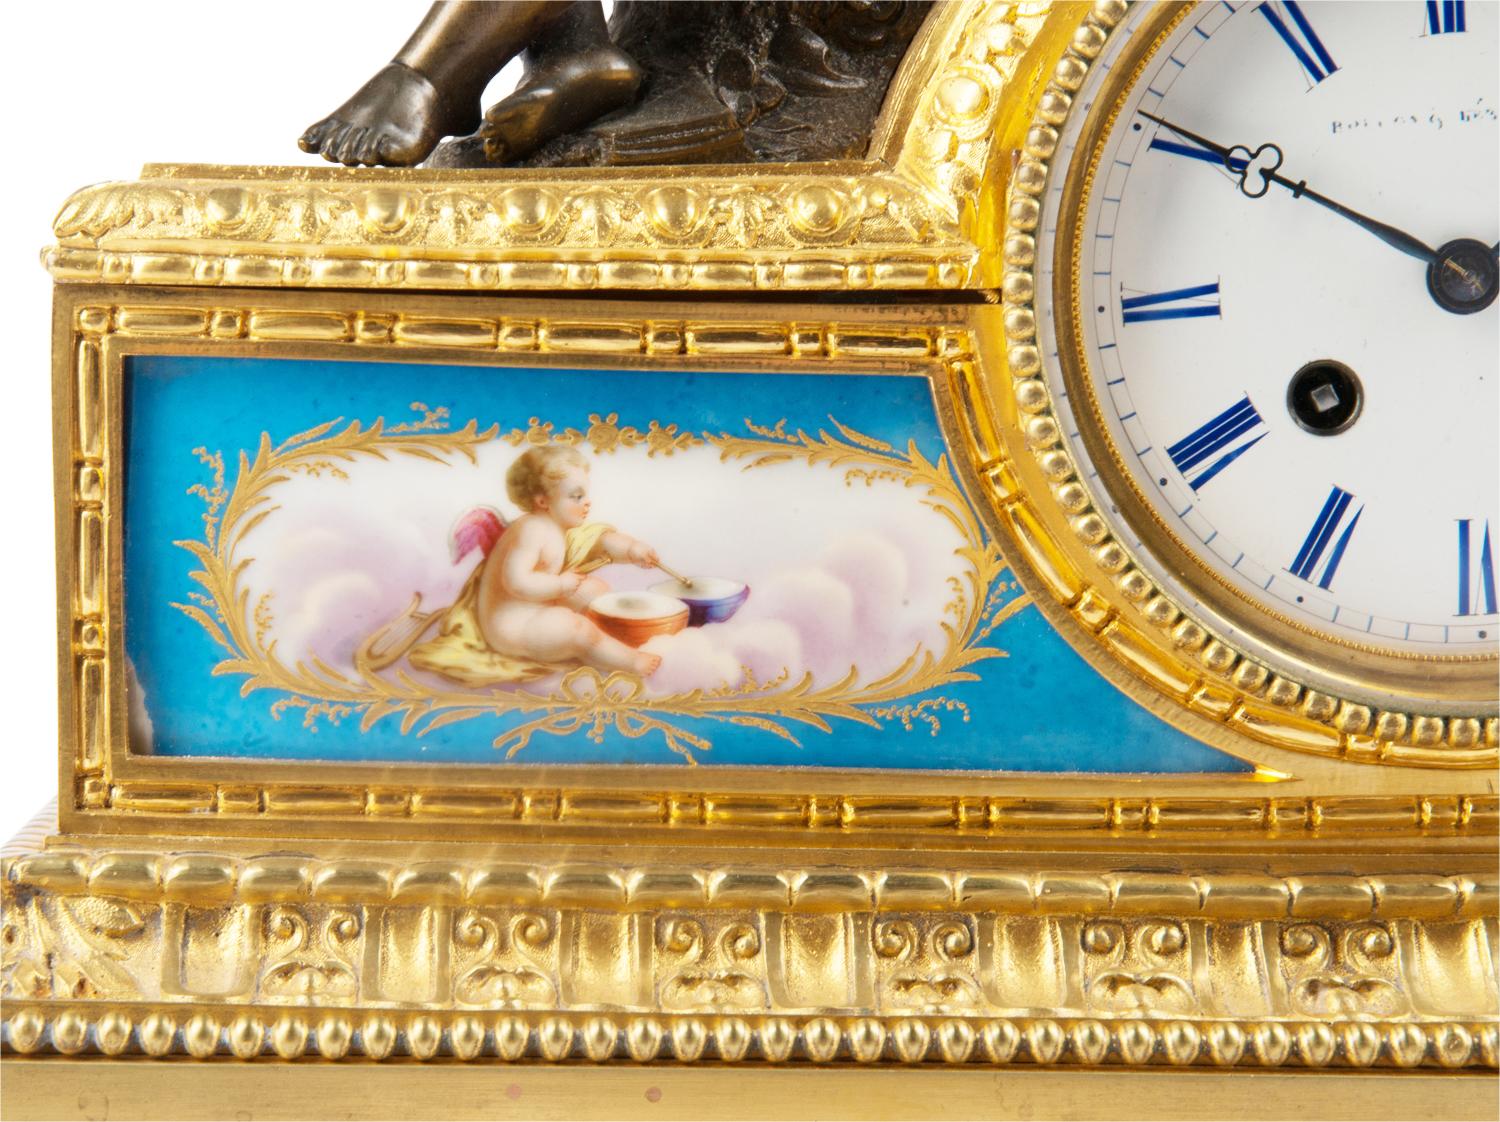 Hand-Painted 19th Century French Mantel Clock